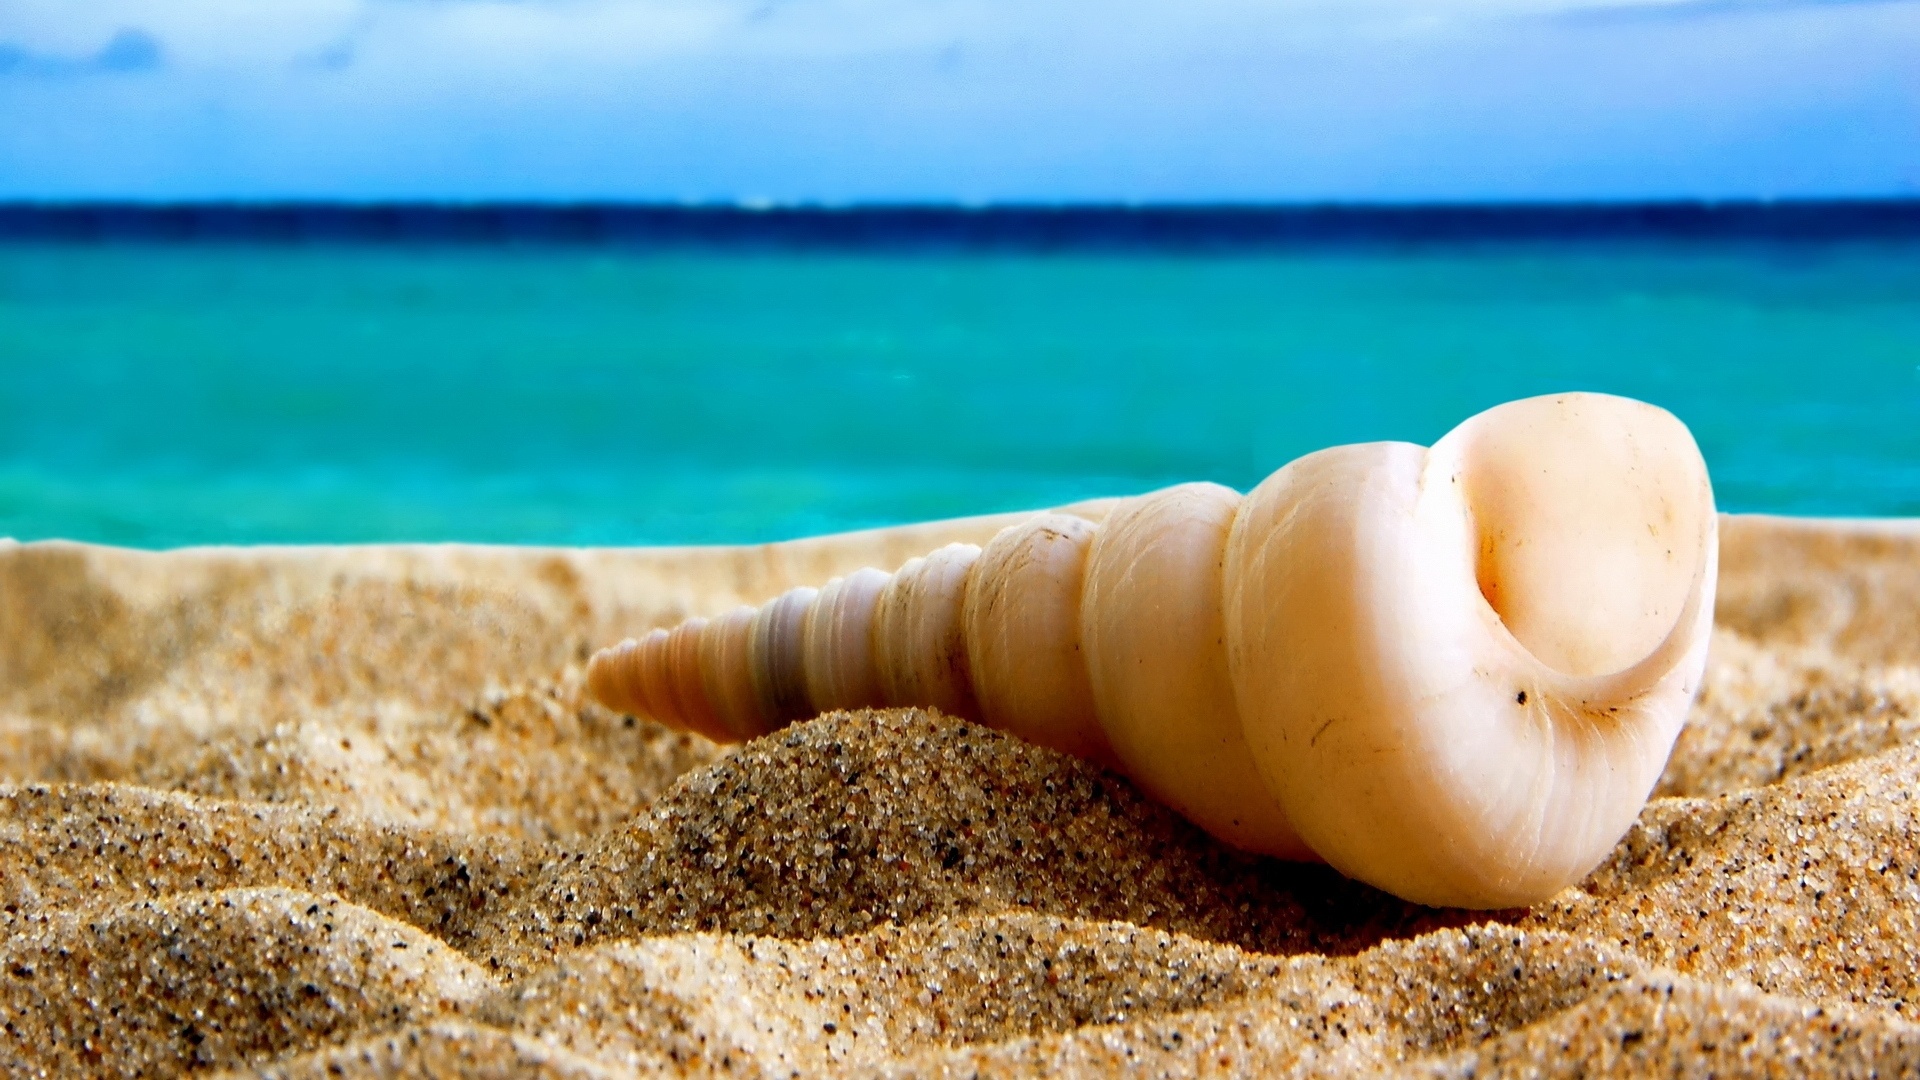 Wallpaper Shell On The Beach - Beautiful Images Of Shells - HD Wallpaper 